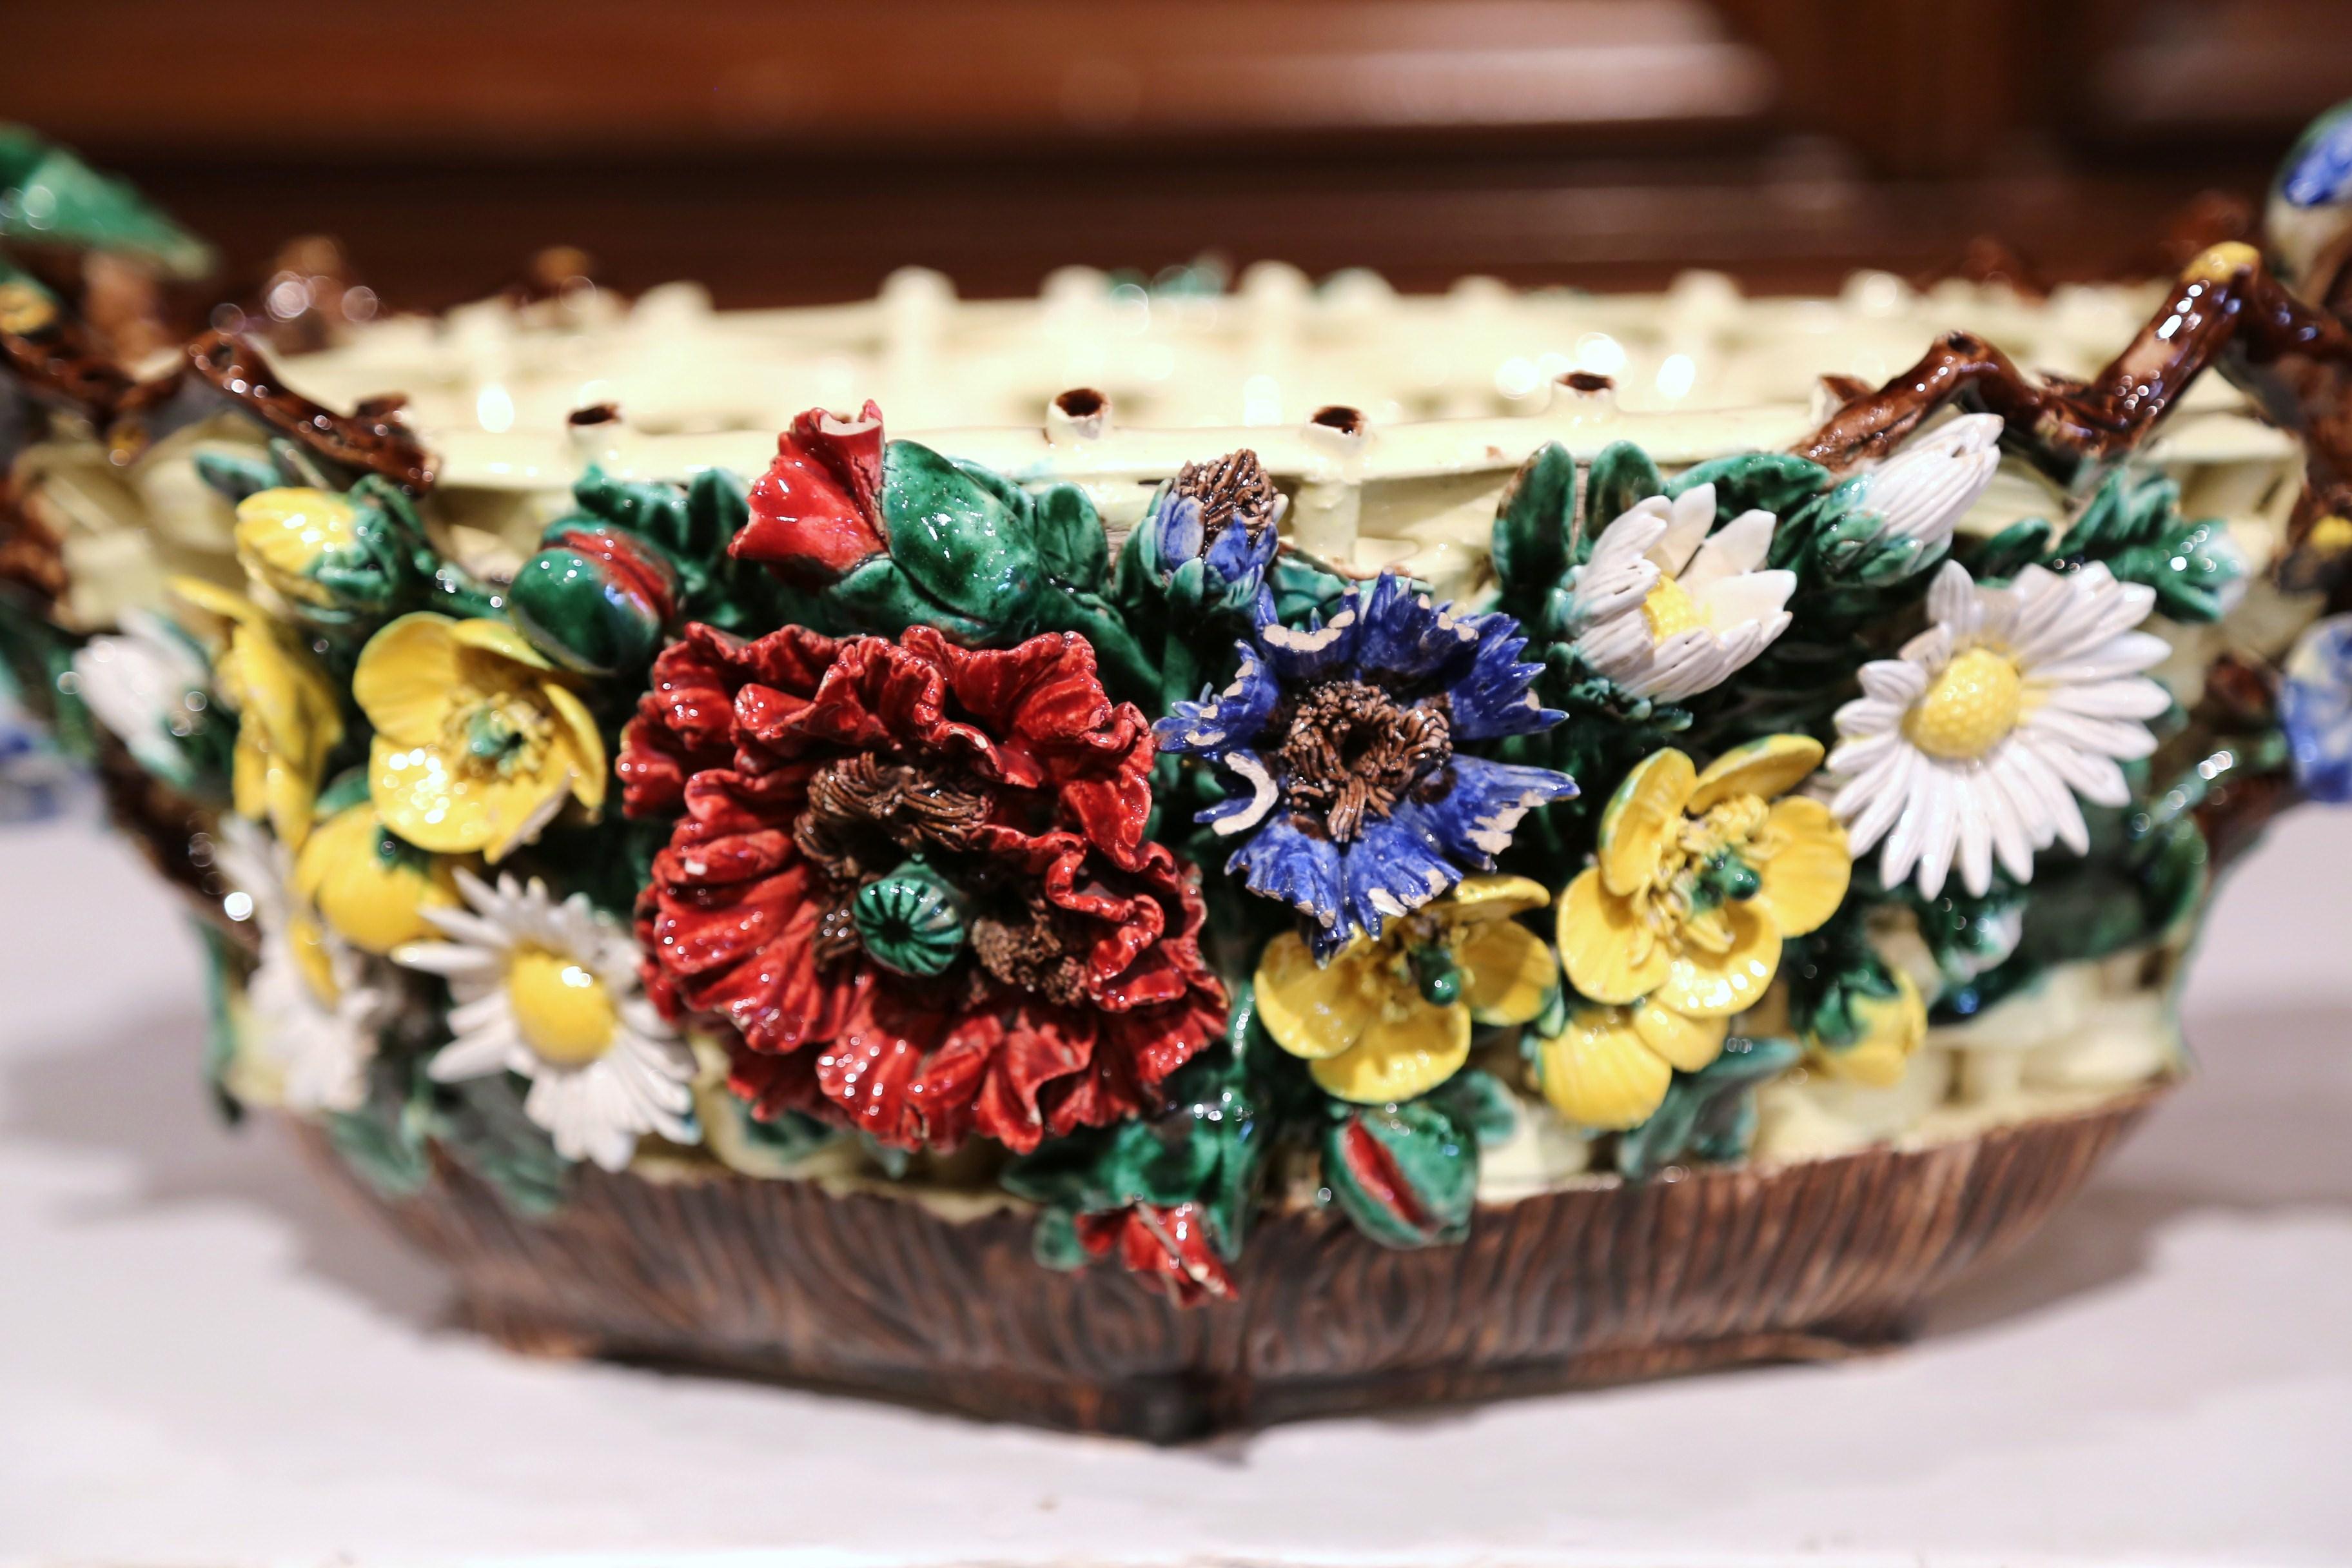 Decorate any tabletop in your home with this elegant, antique Majolica jardinière. Crafted in France, circa 1860, the colorful planter has an intricate basket weave motif at the base, embellished with hand painted flowers on both sides. The handles